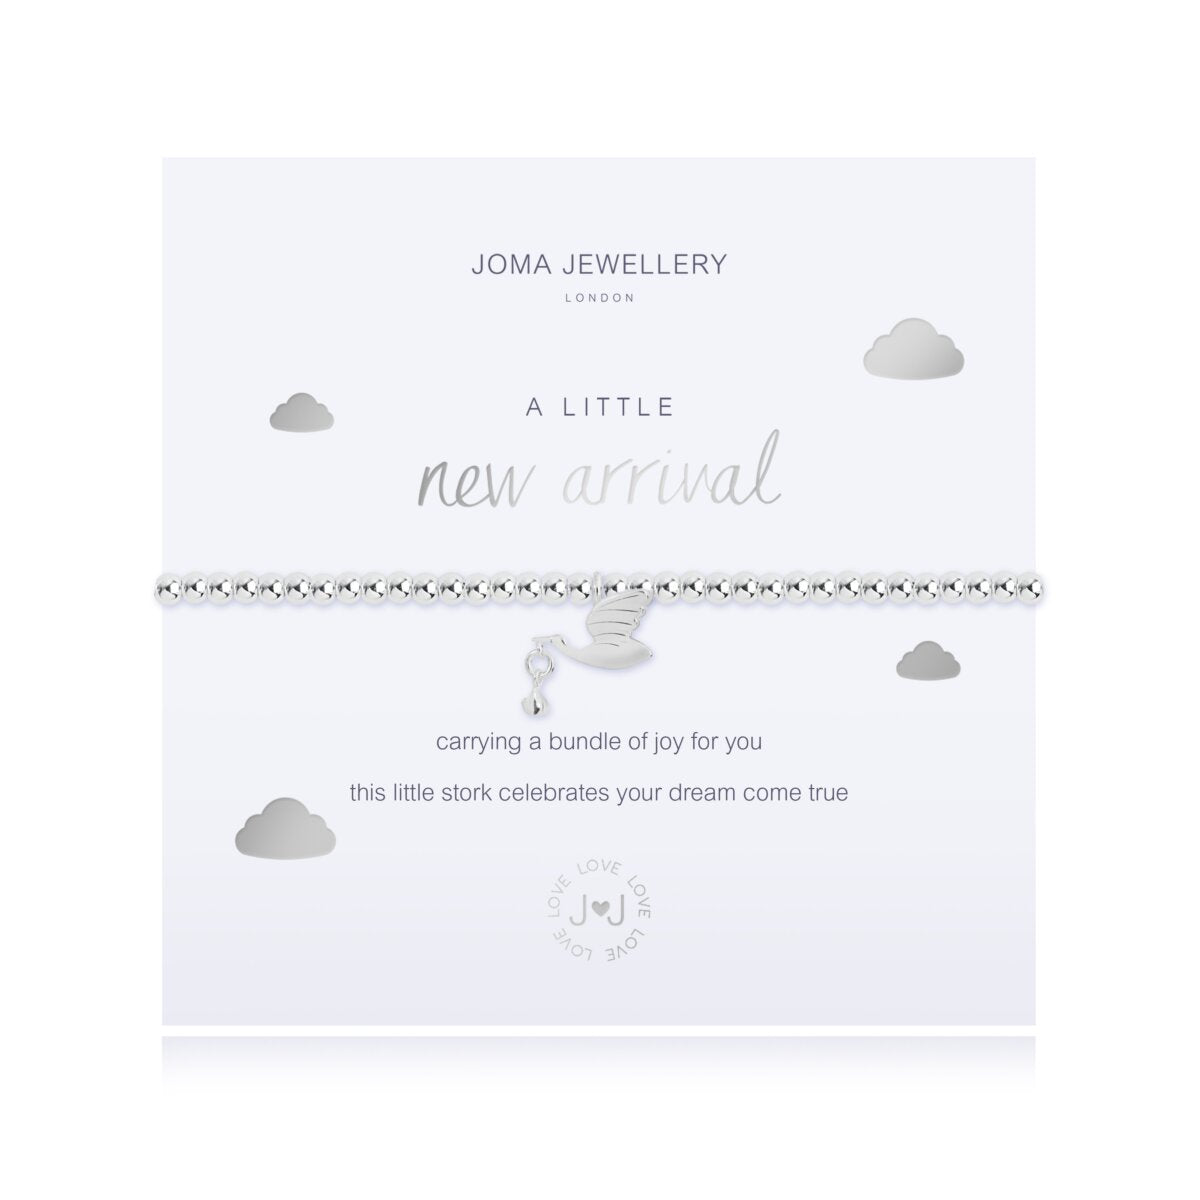 Joma Jewellery 'A Little' New Arrival